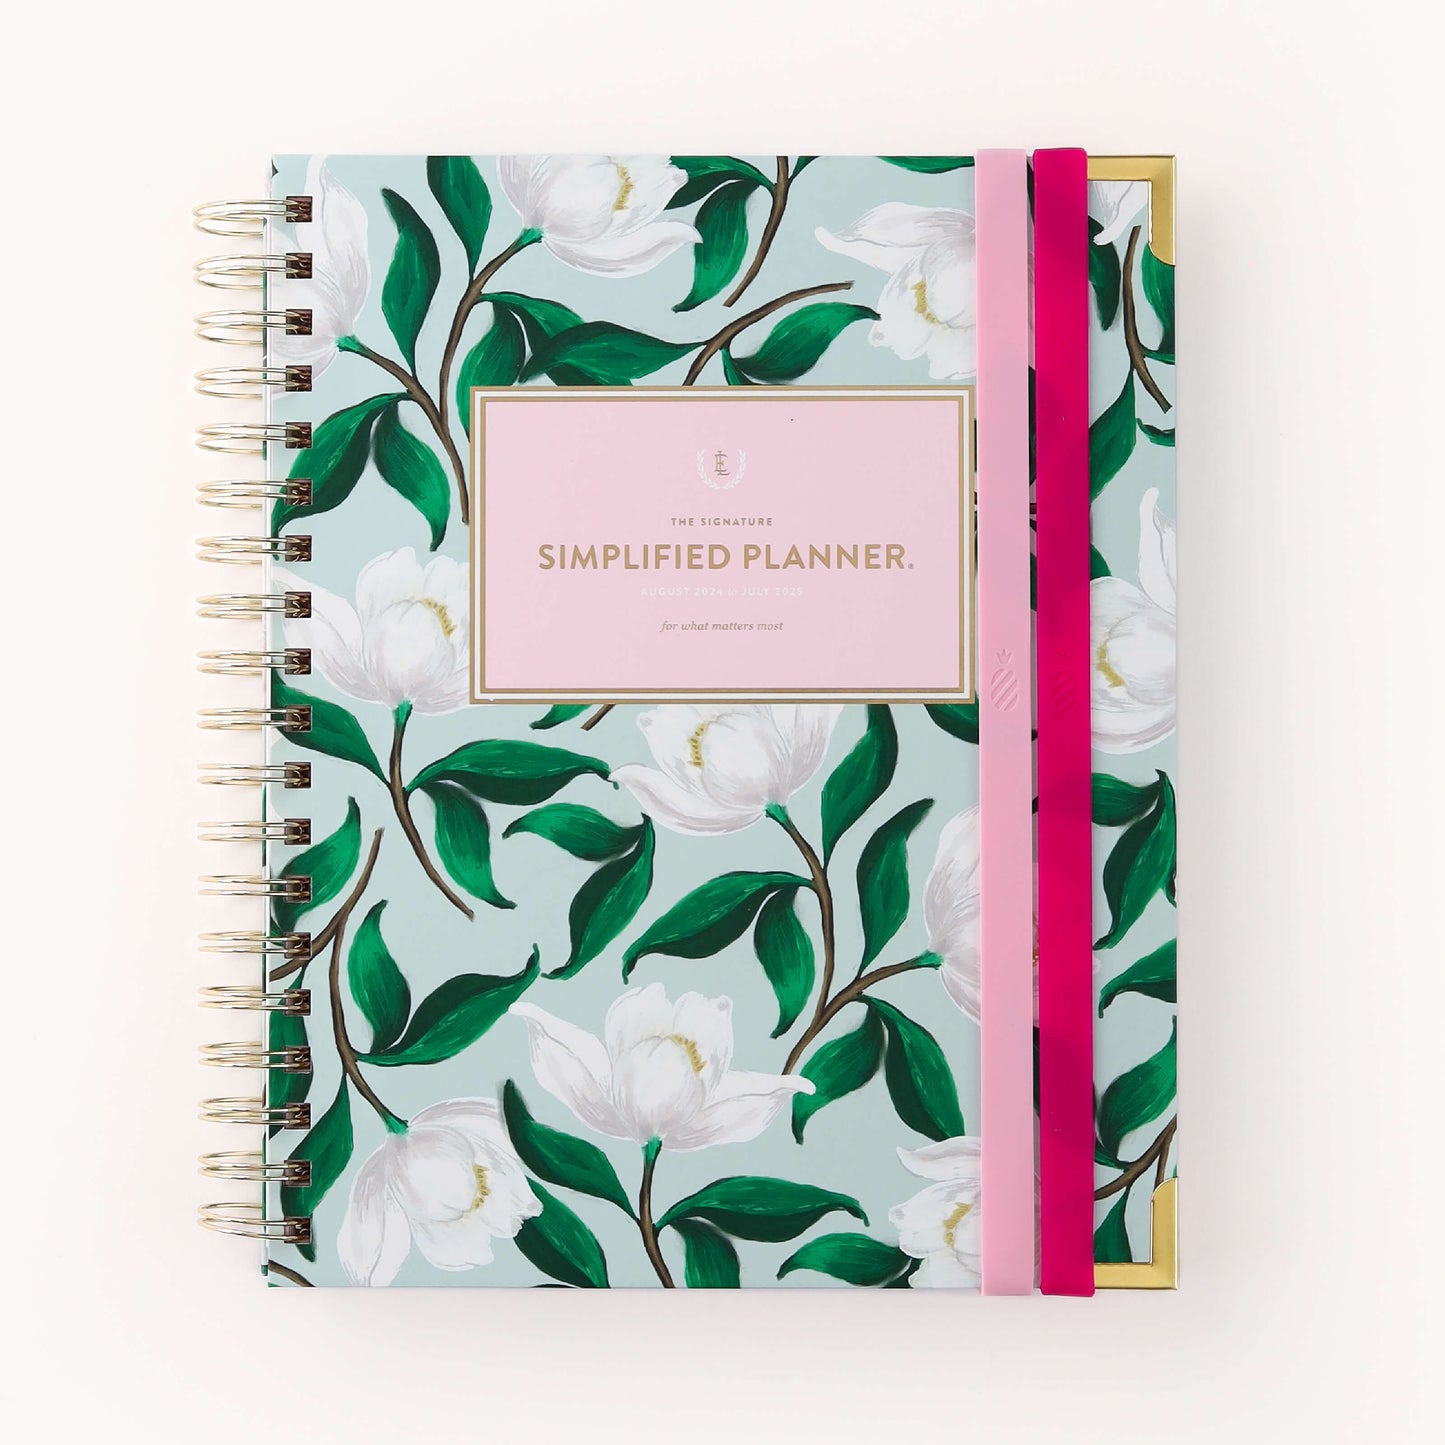 BLUSH & RASPBERRY BANDS ON WEEKLY PLANNER